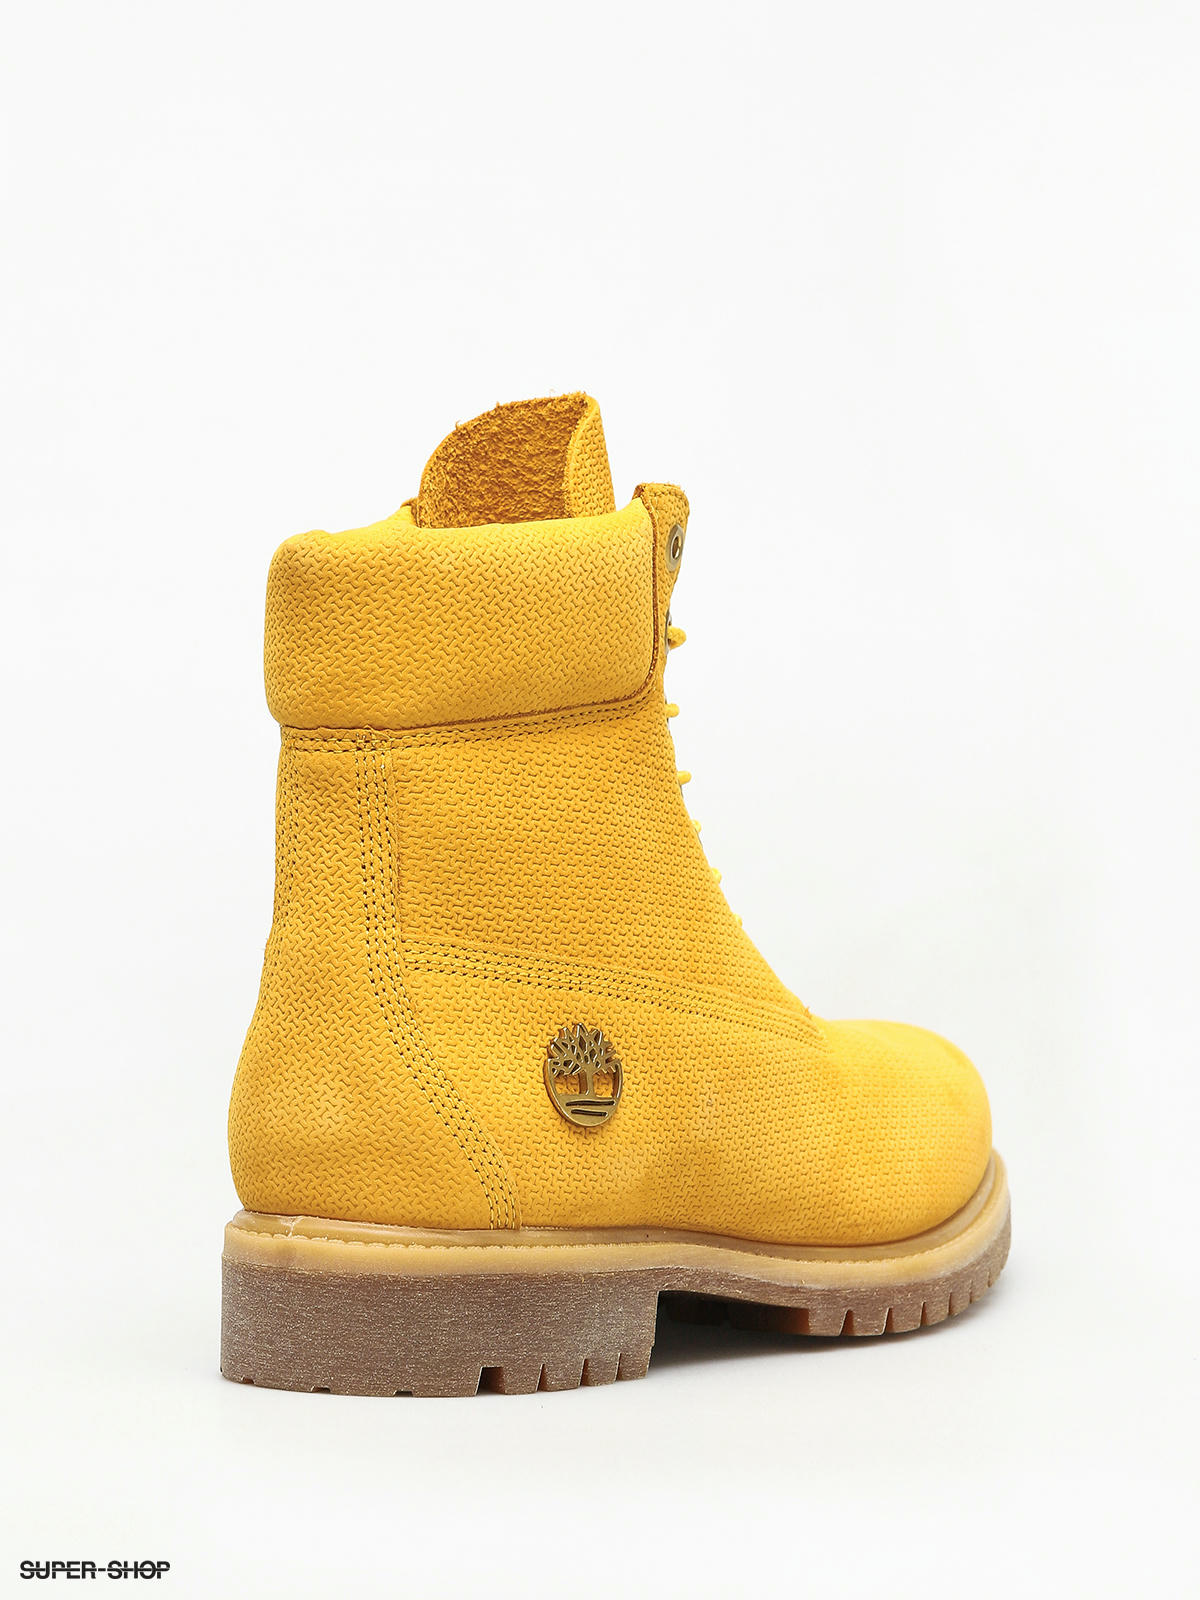 old school super timberland boots